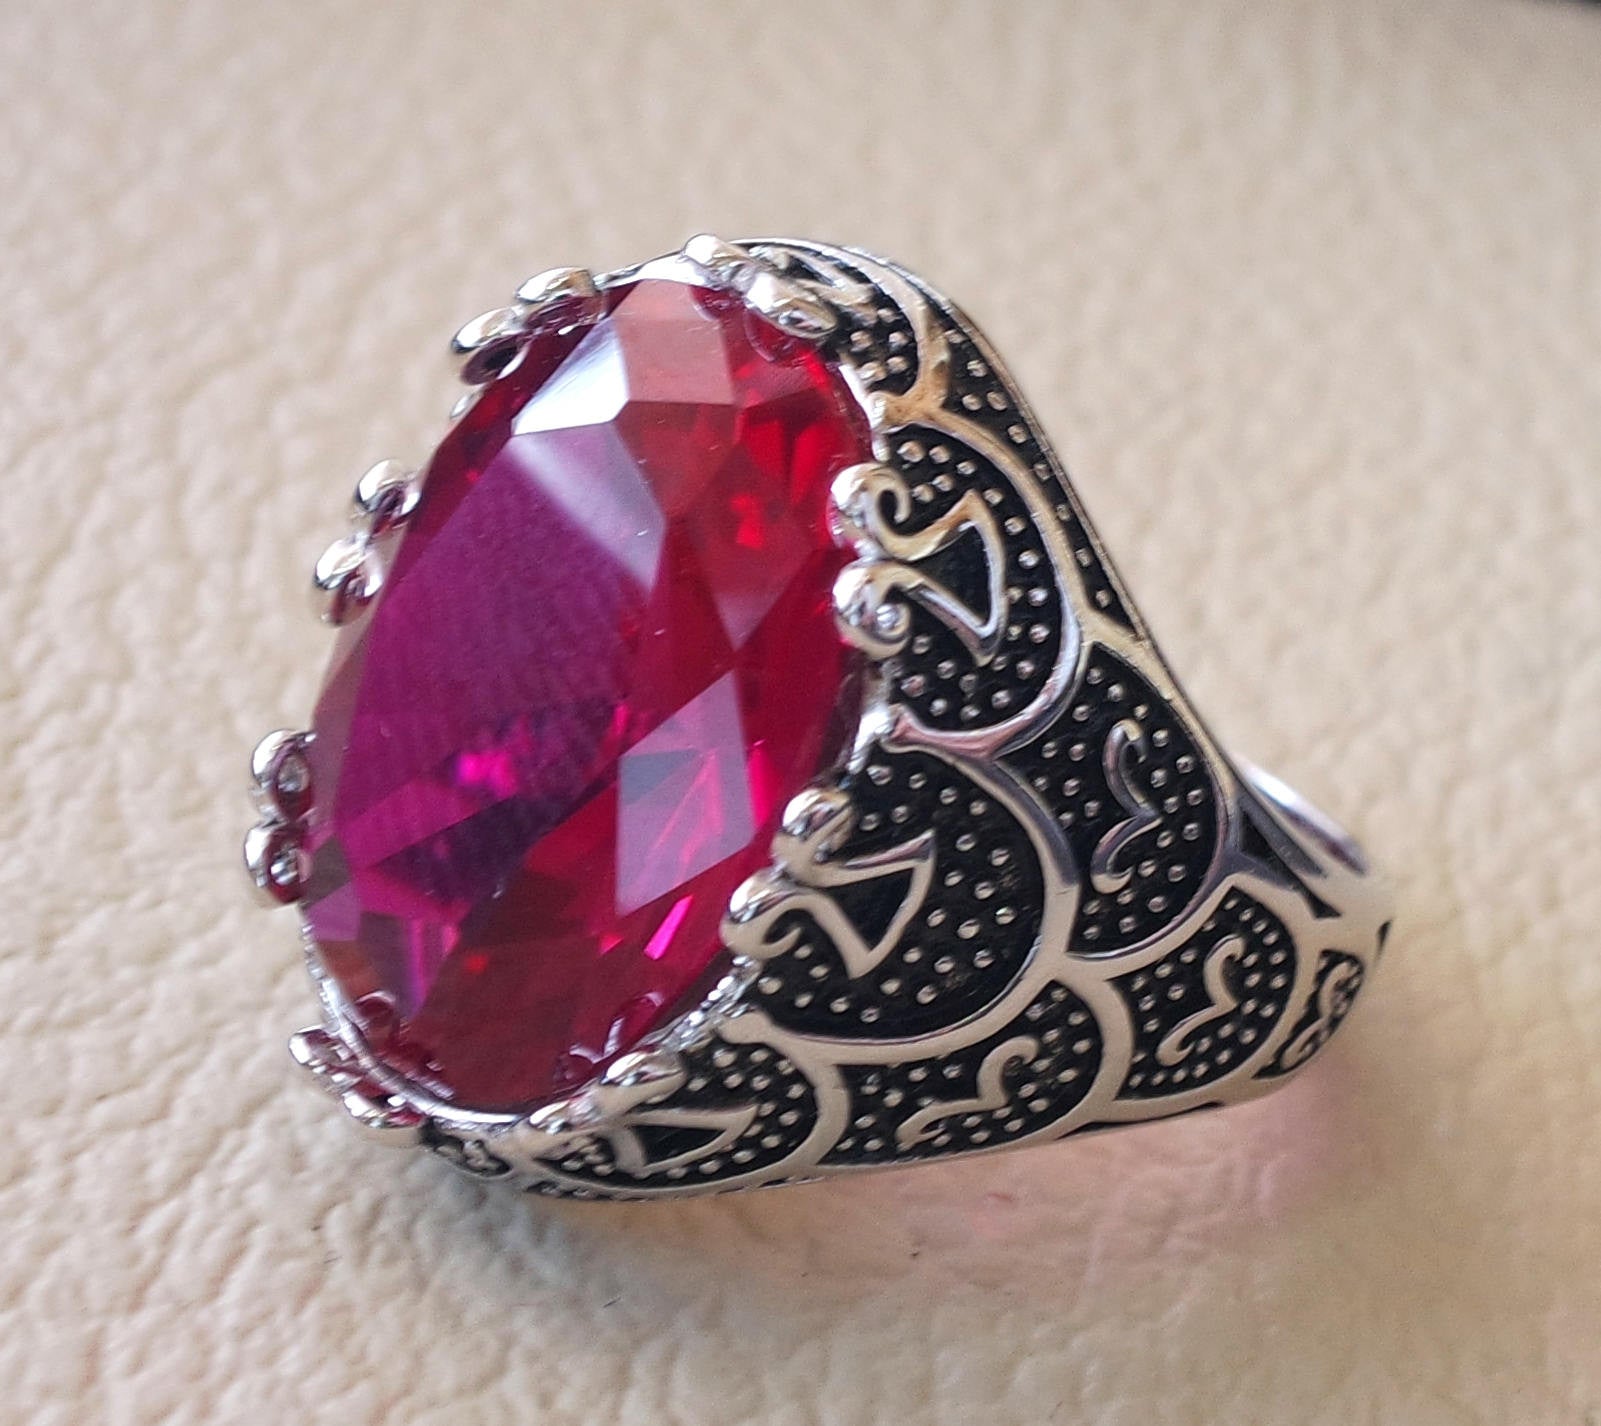 corundum red ruby identical synthetic stone high quality imitation  color huge heavy men ring sterling silver 925 any size ottoman jewelry